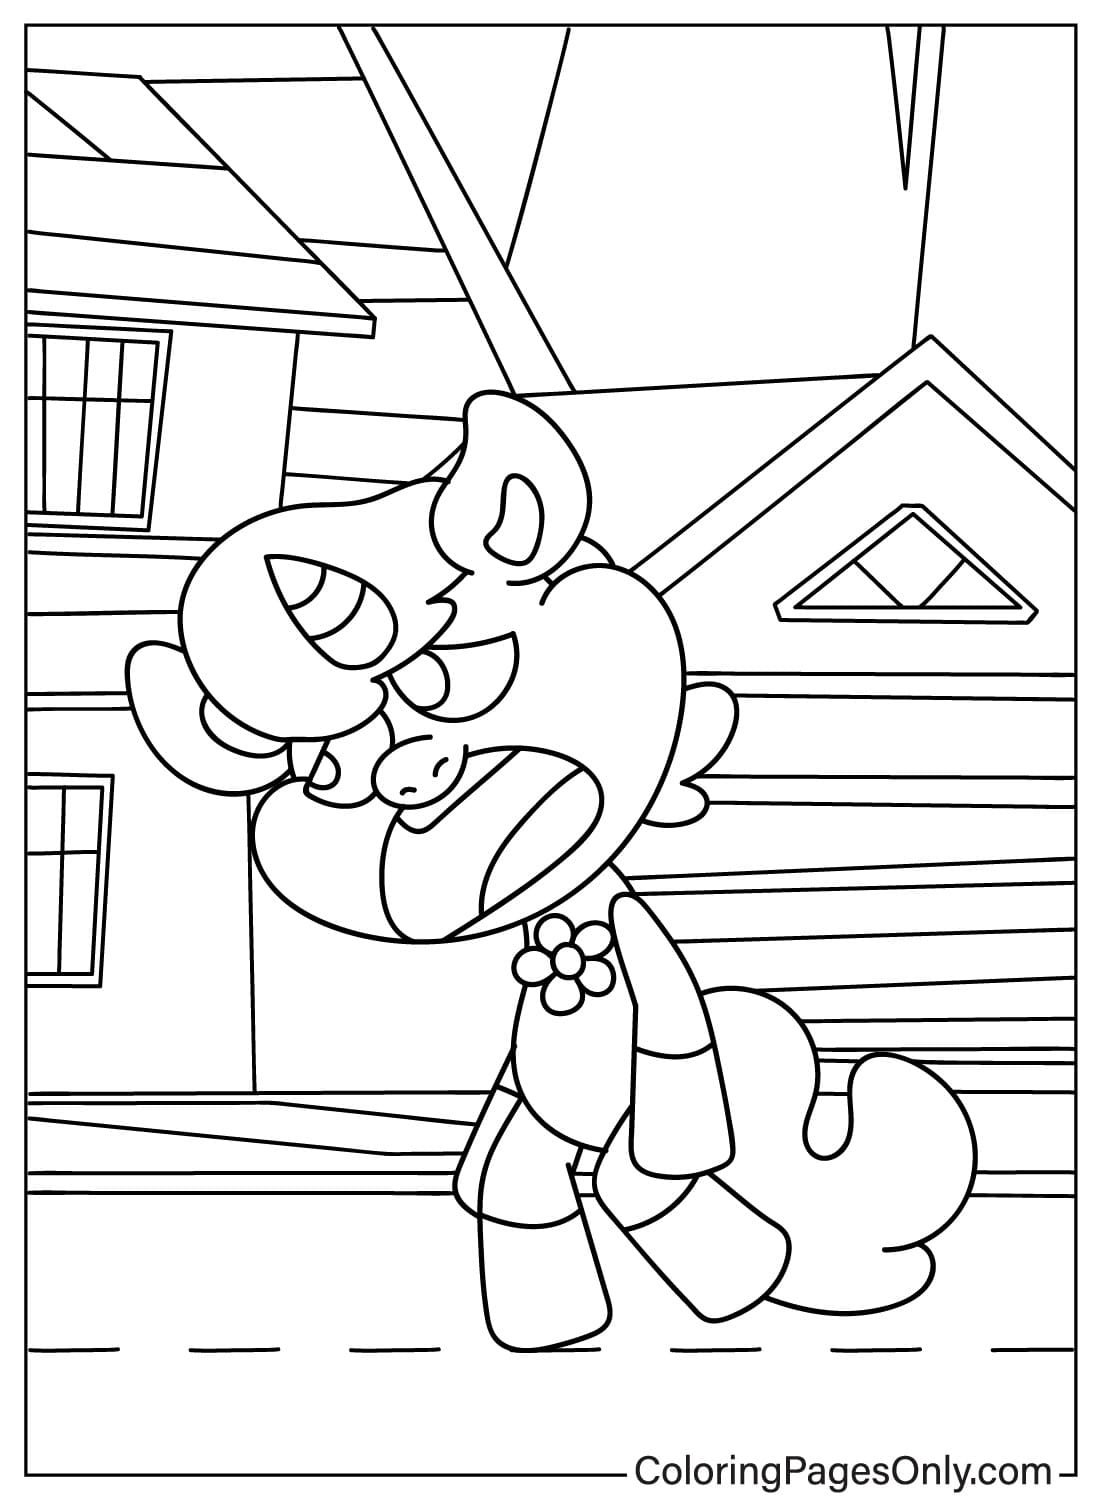 CraftyCorn Tired Coloring Page from CraftyCorn